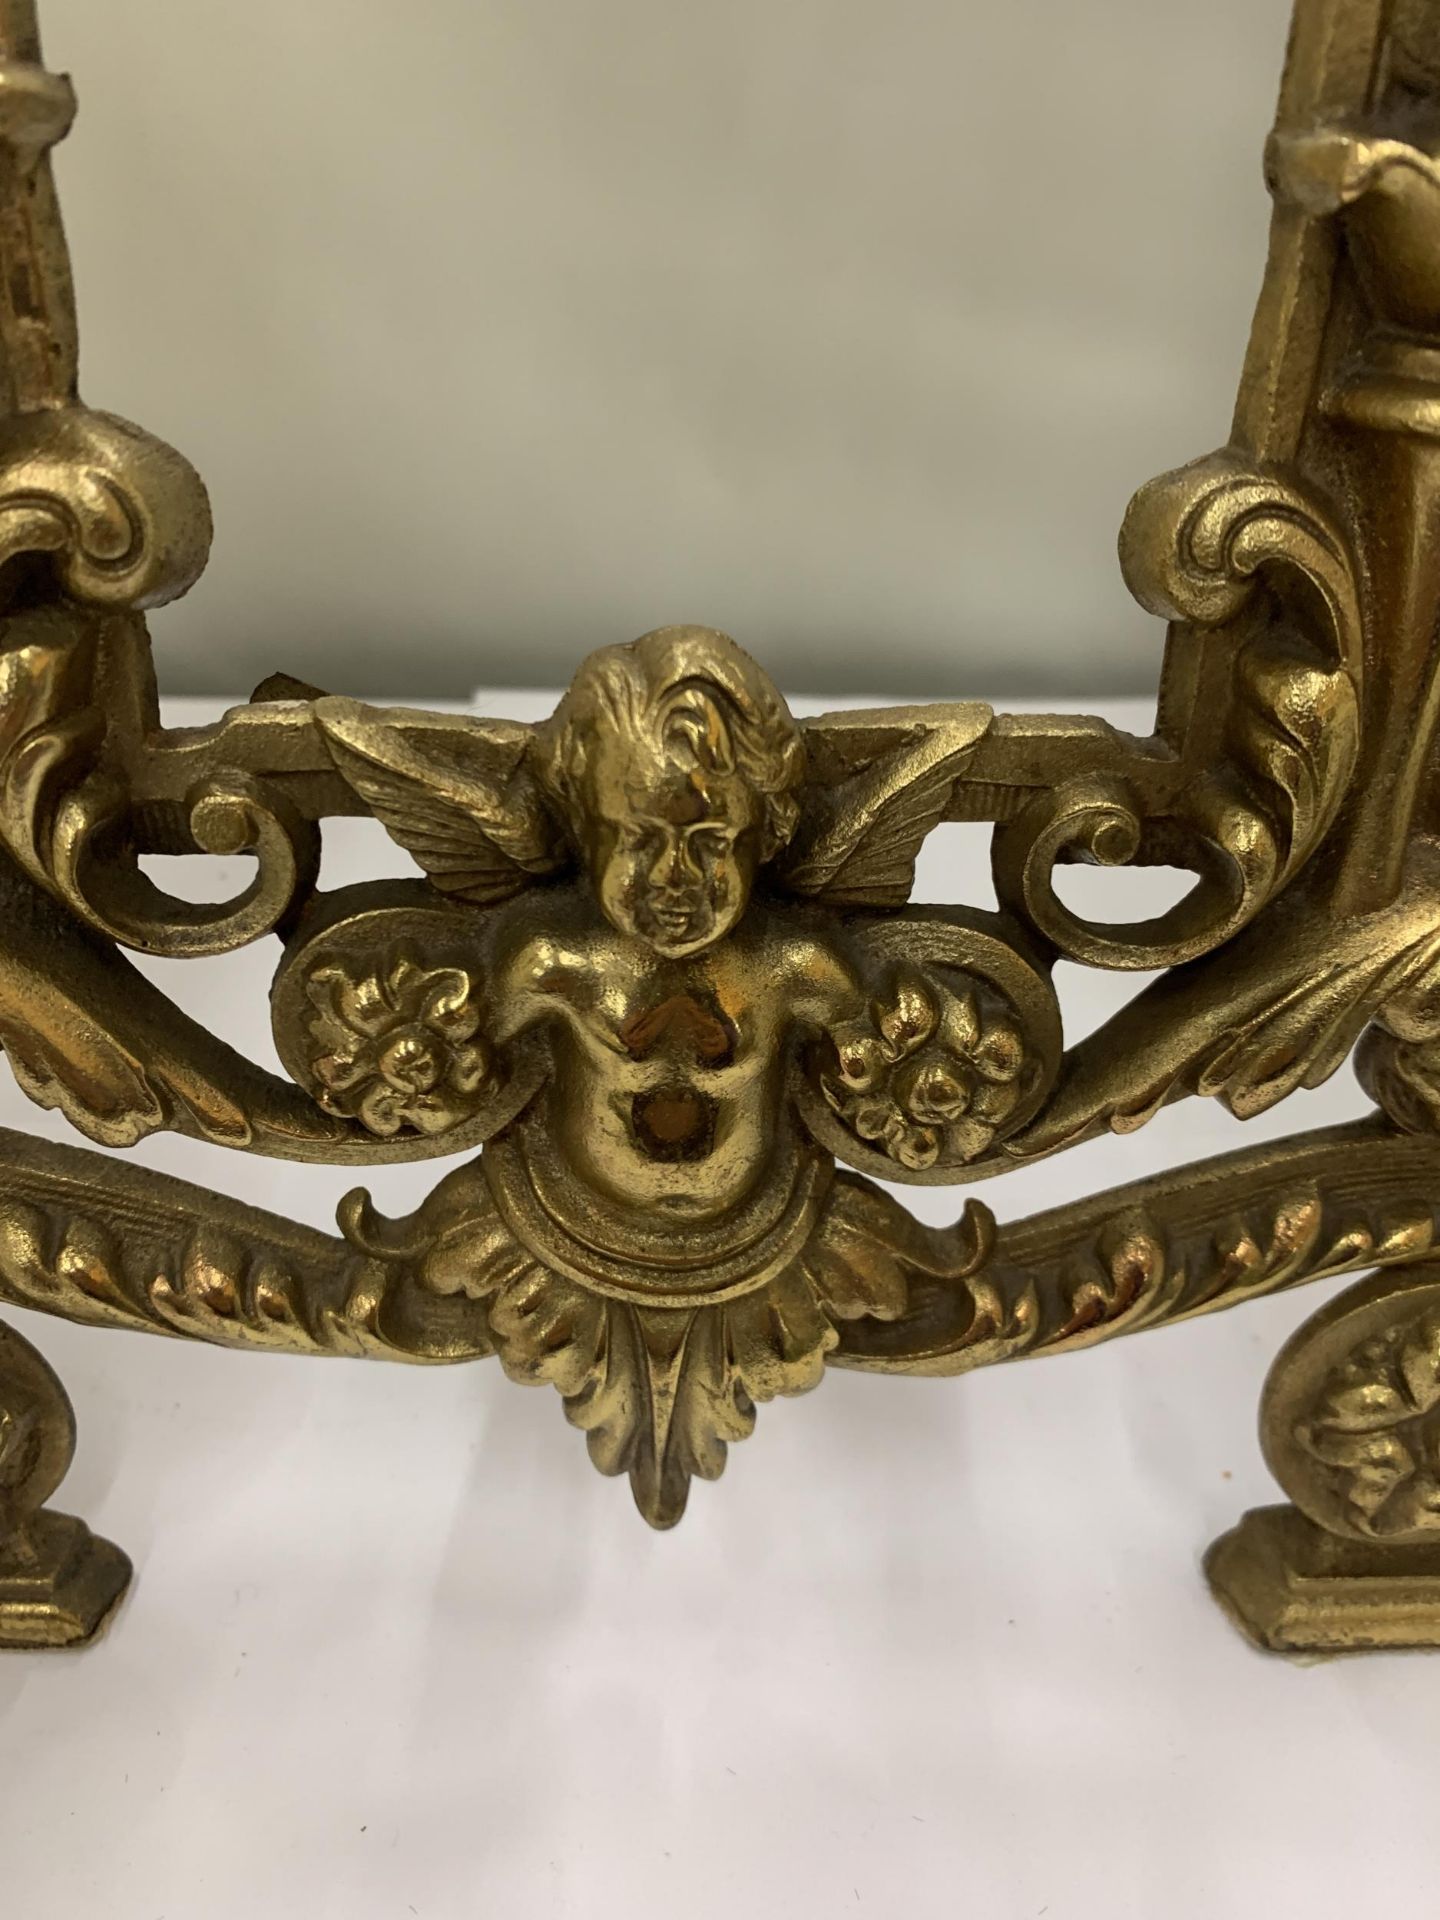 A DECORATIVE HEAVY BRASS FRAME WITH CHERUBS - Image 3 of 5